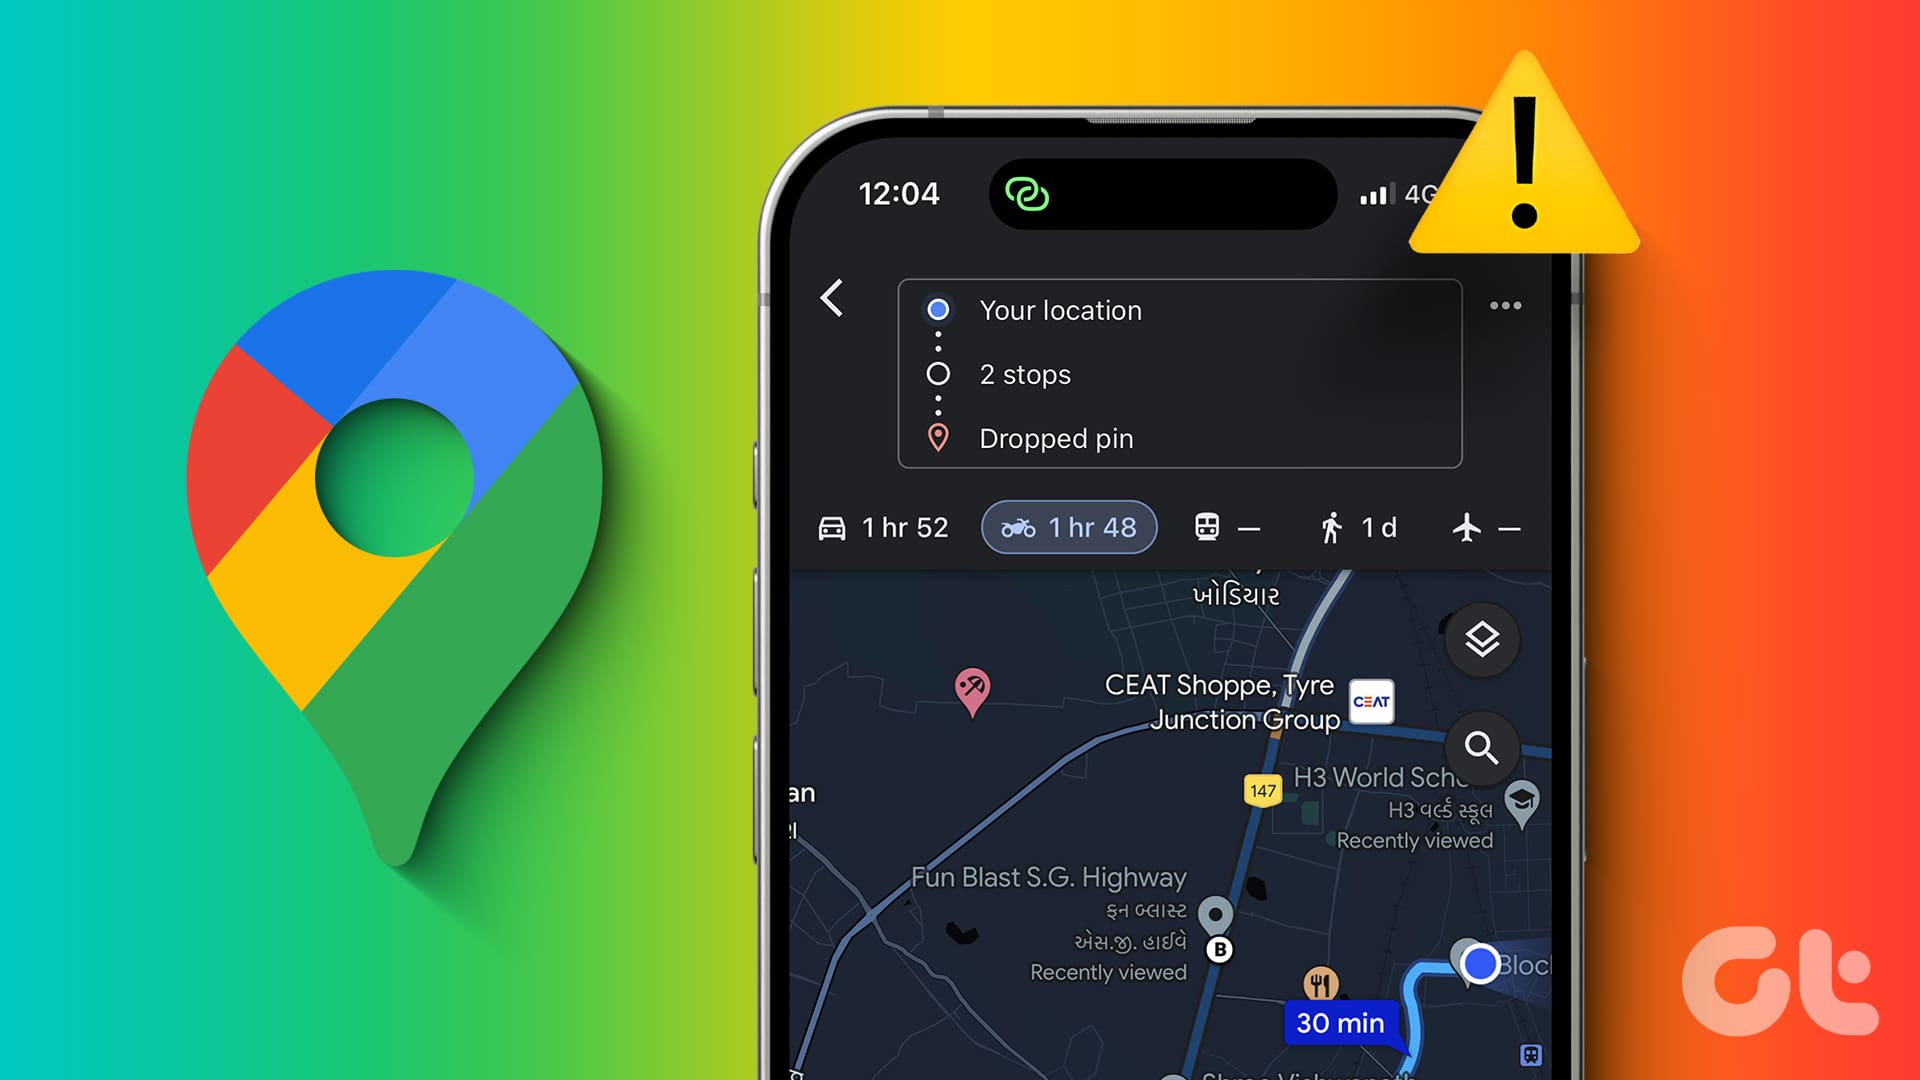 N_Best_Fixes_for_Dark_Mode_Not_Working_in_Google_Maps